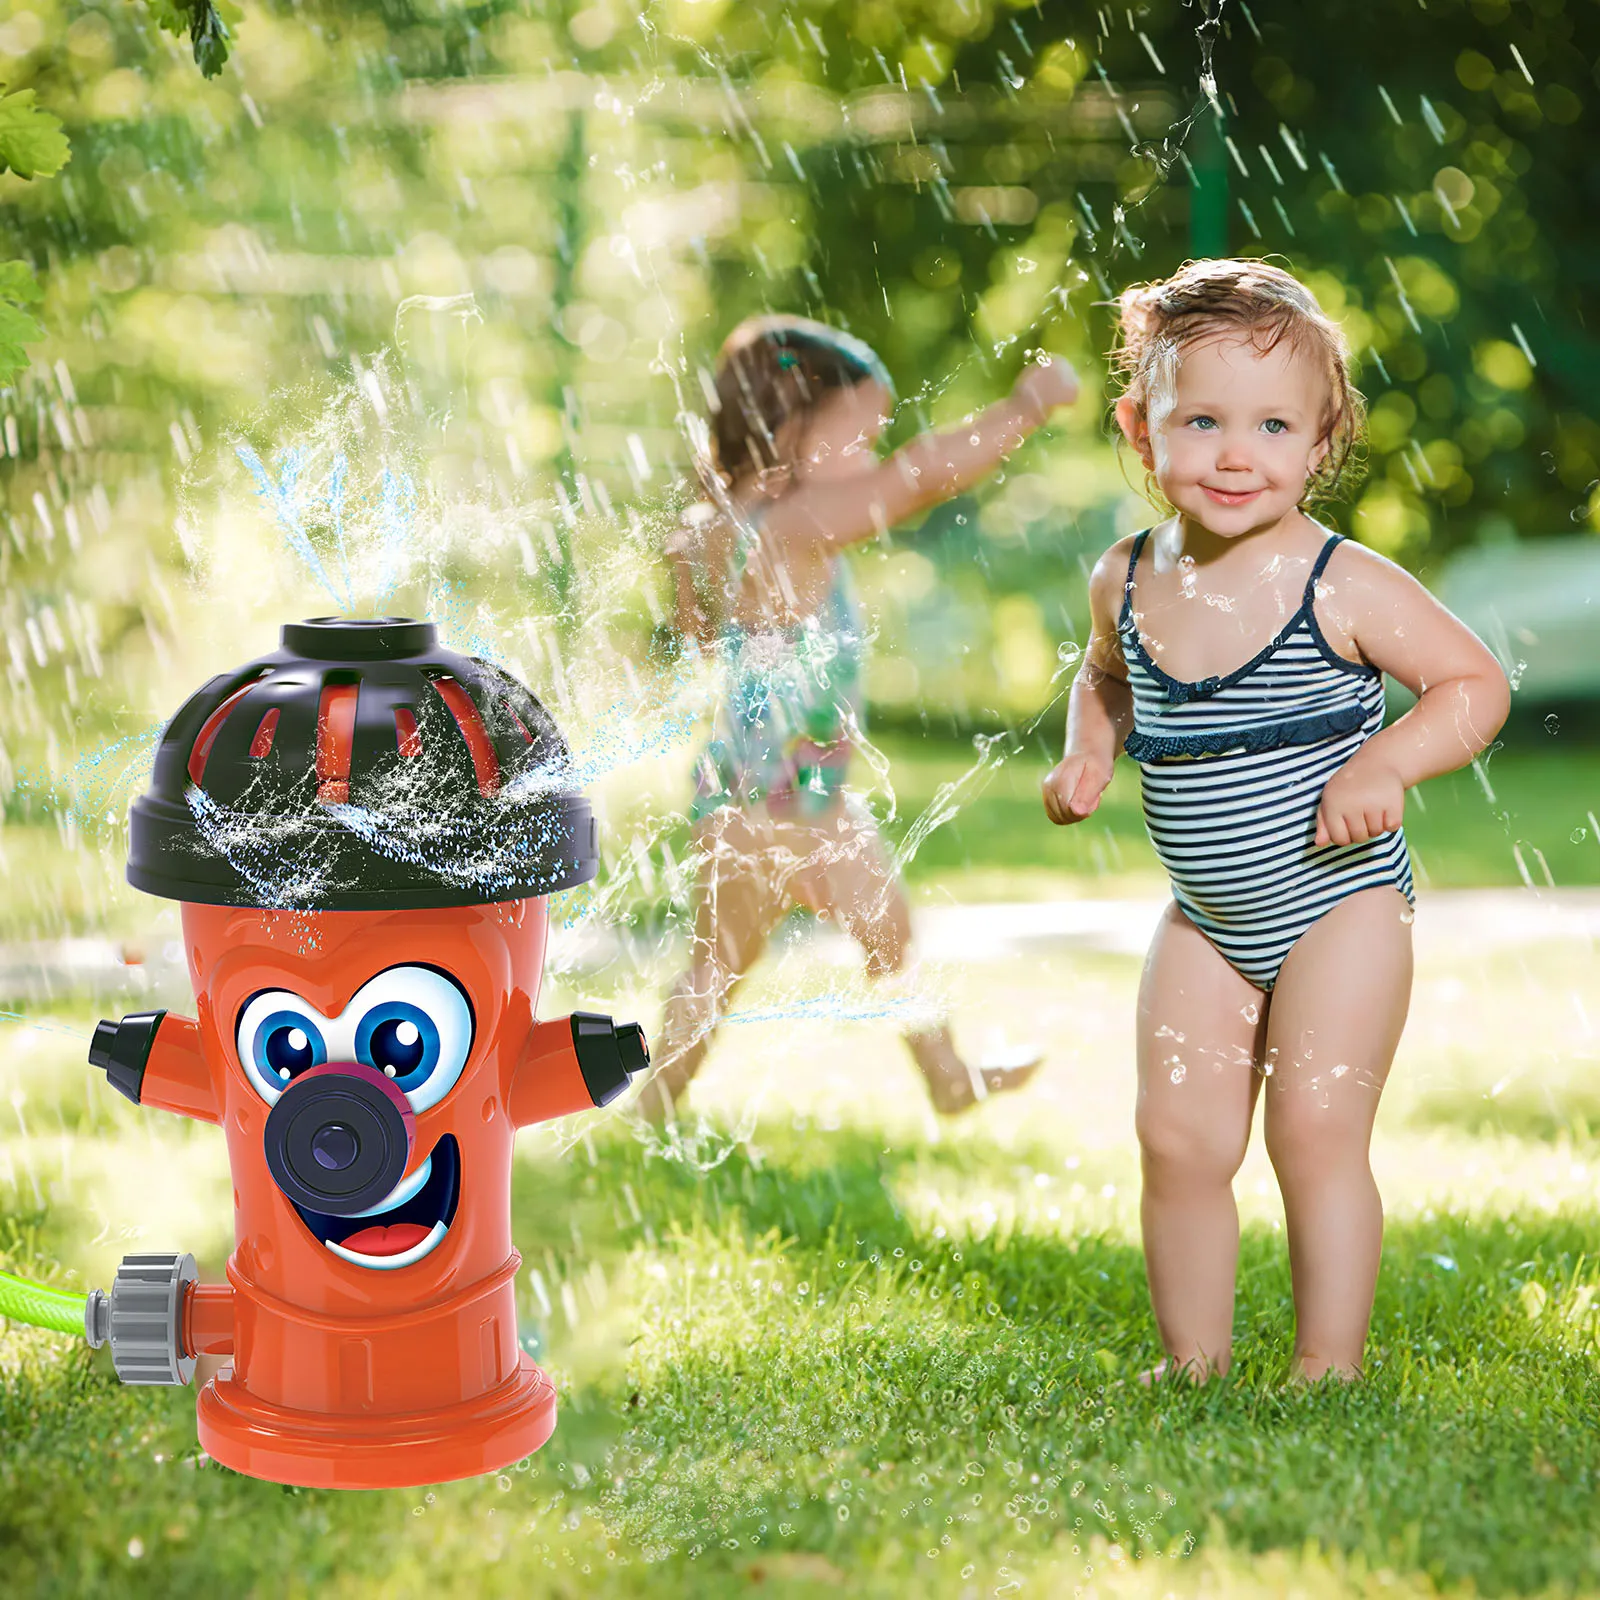 

Fire Hydrant Spray Toy Hydrant Water Sprinkler For Kids Outdoor Water Spray Toy Summer Cooling Toy For Lawn Backyard Courtyard